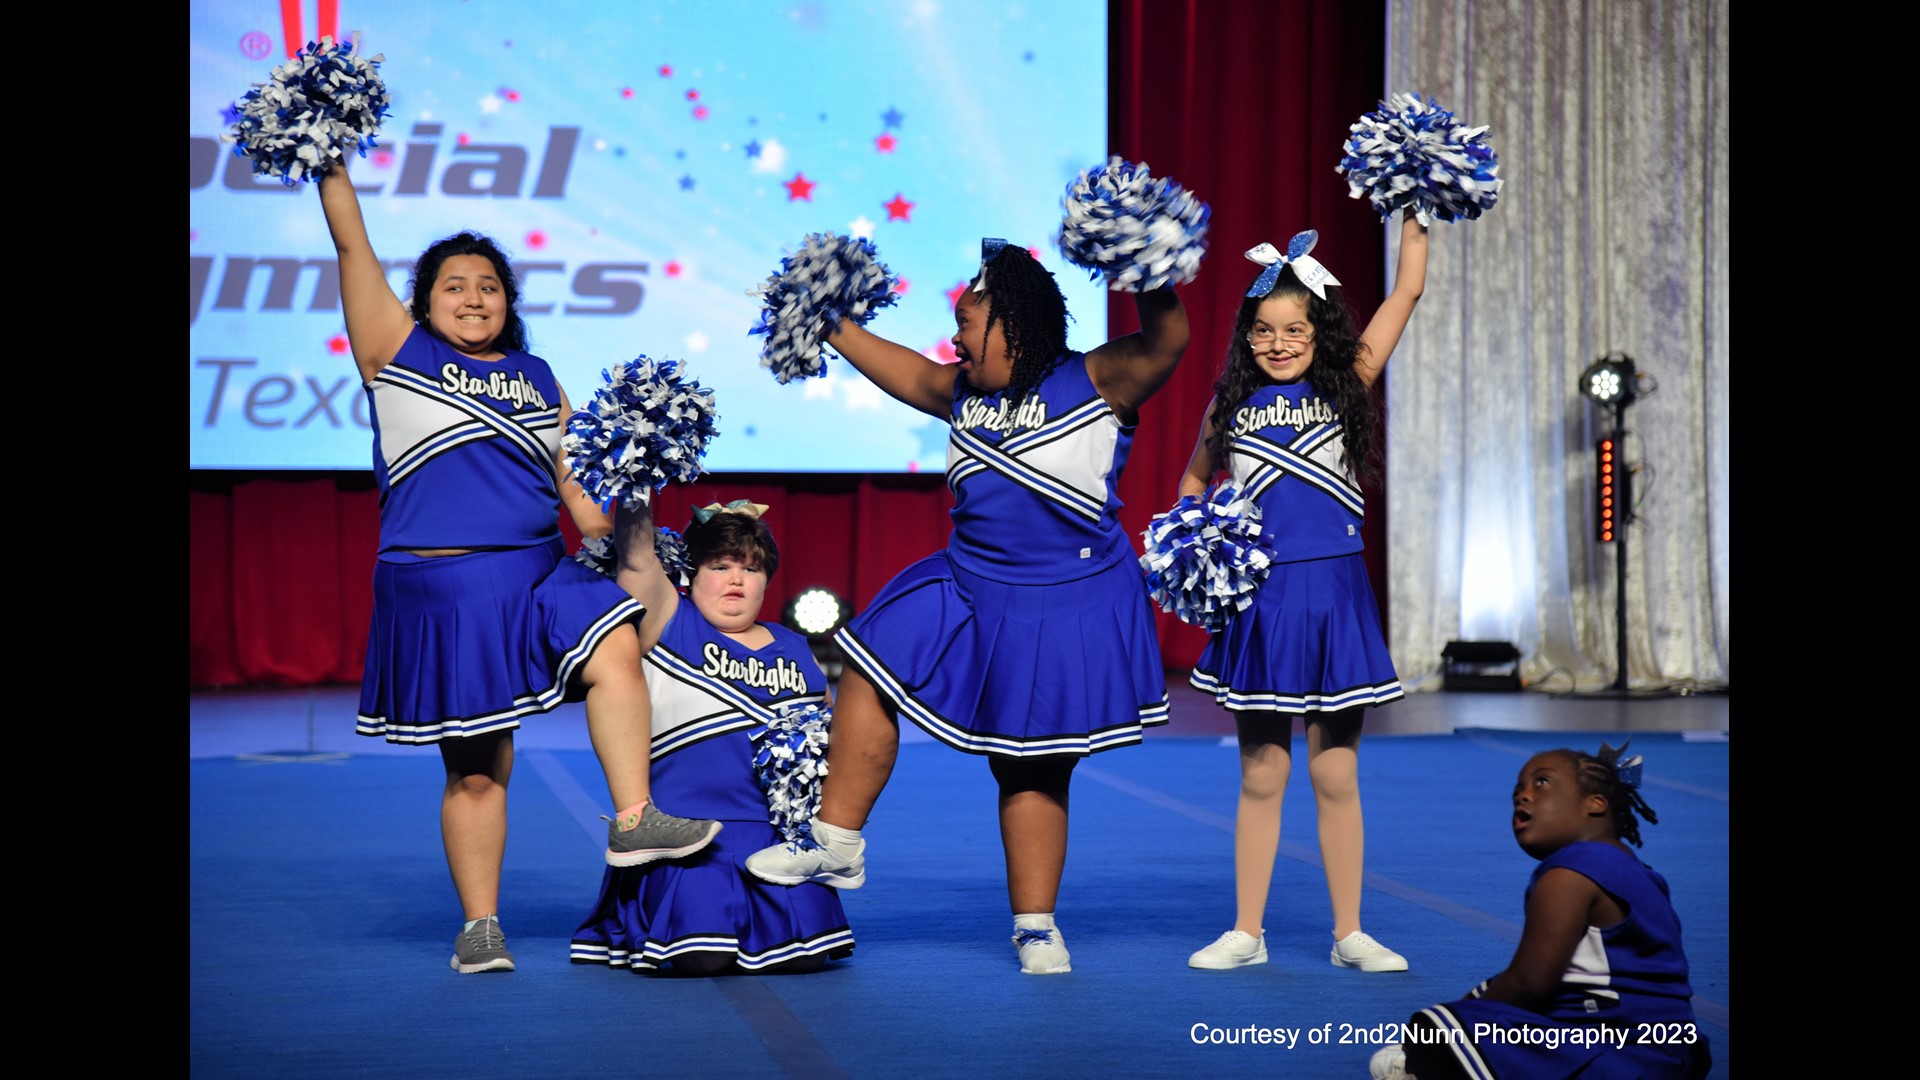 Inside Mesquite's Special Olympics cheer squad, the Starlights